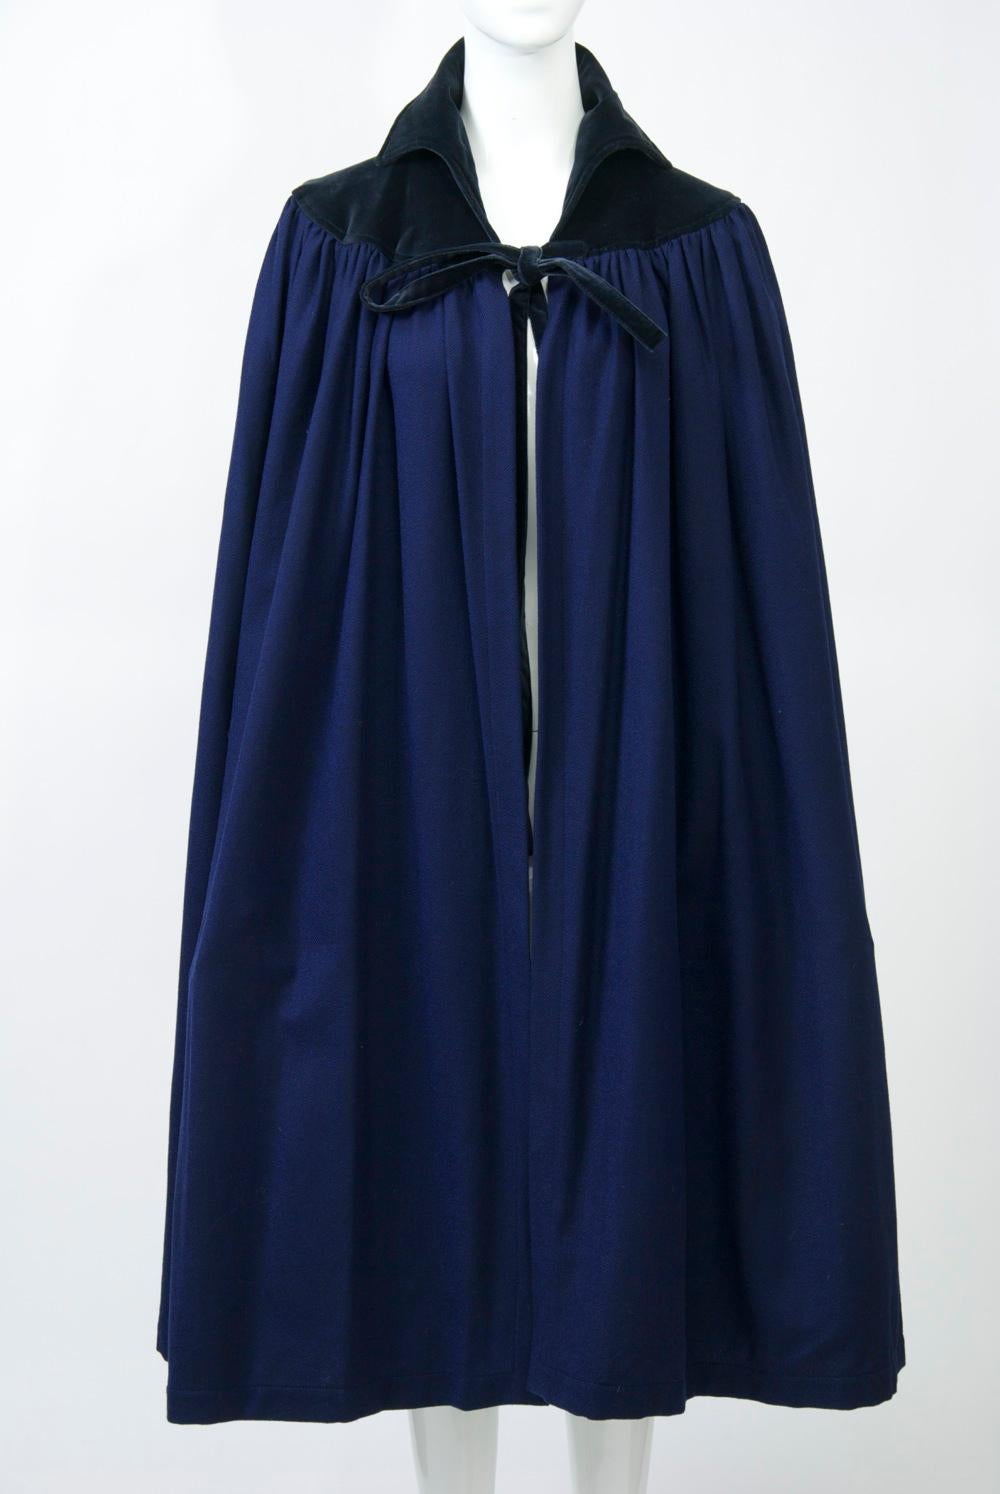 Iconic YSL 1970s Russian Collection cape in dark blue wool with black velvet yoke, collar and tie. The soft wool body is gathered for fullness at the yoke. Mid-calf length. Unlined. A sought-after classic.